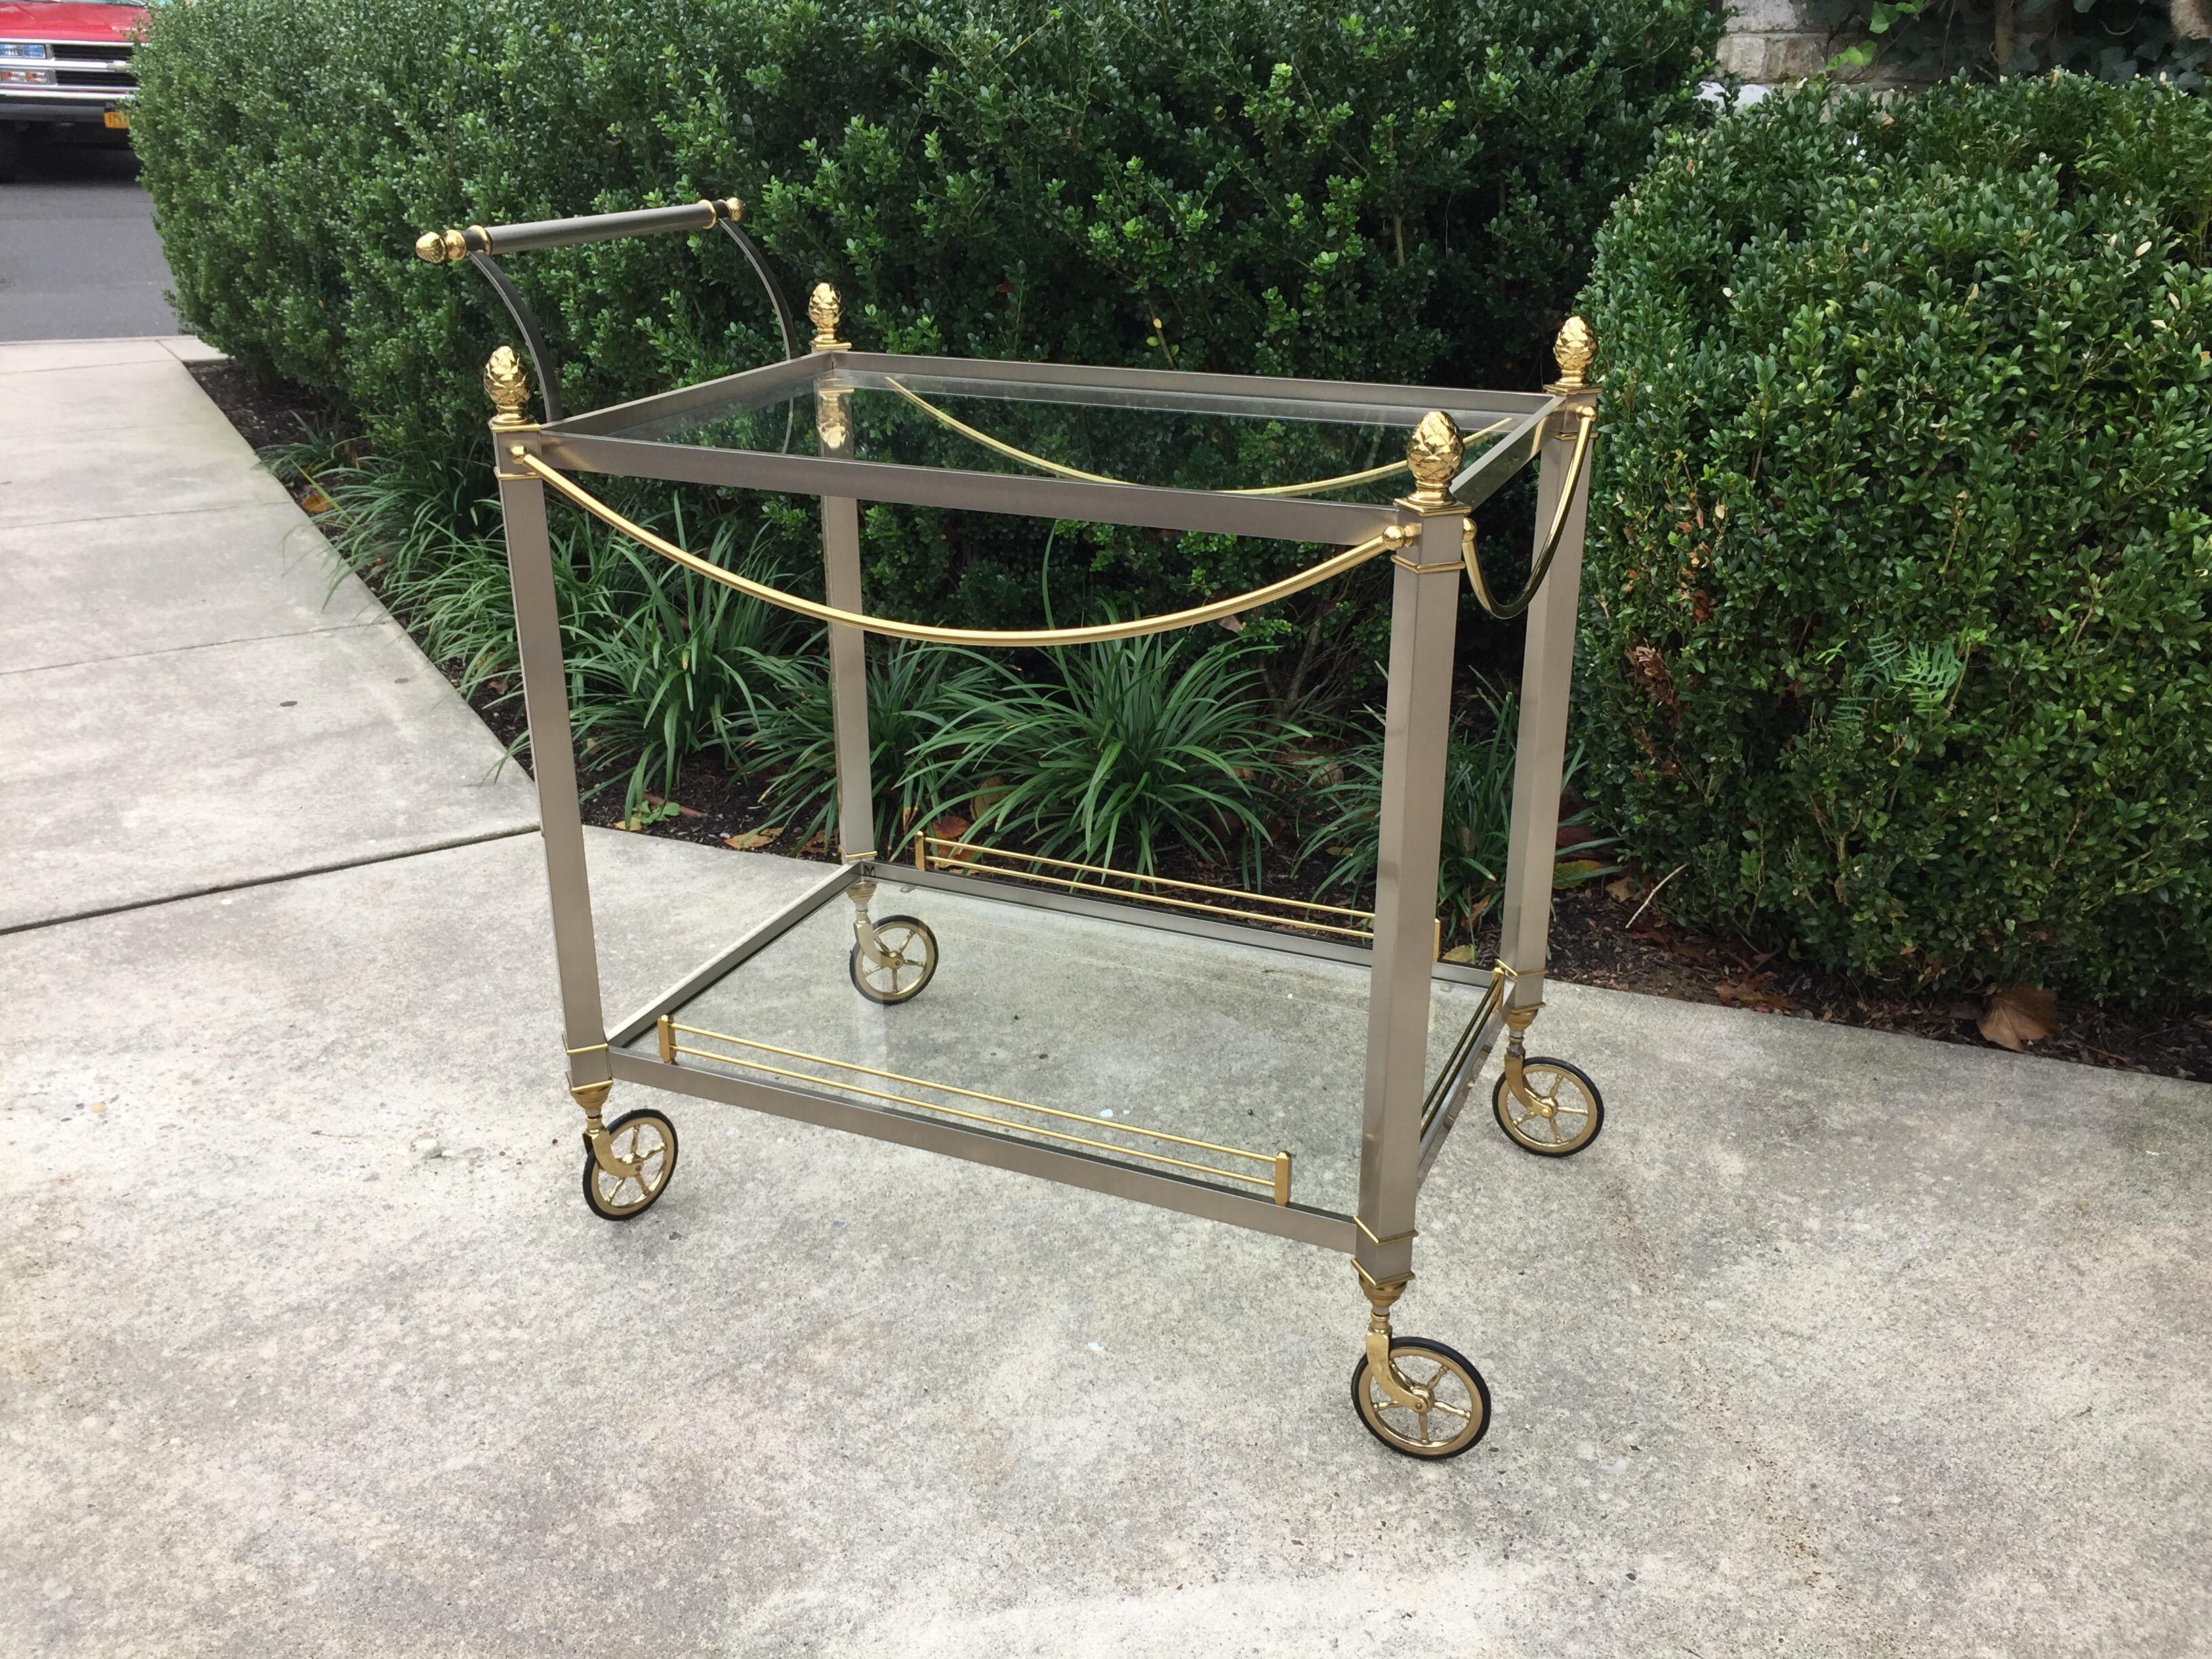 Brushed steel and brass blended in this beautiful and elegant bar/ tea cart (Marked Italy). Two levels and wheels move easily.

Height of bar handle is 33.5 inches